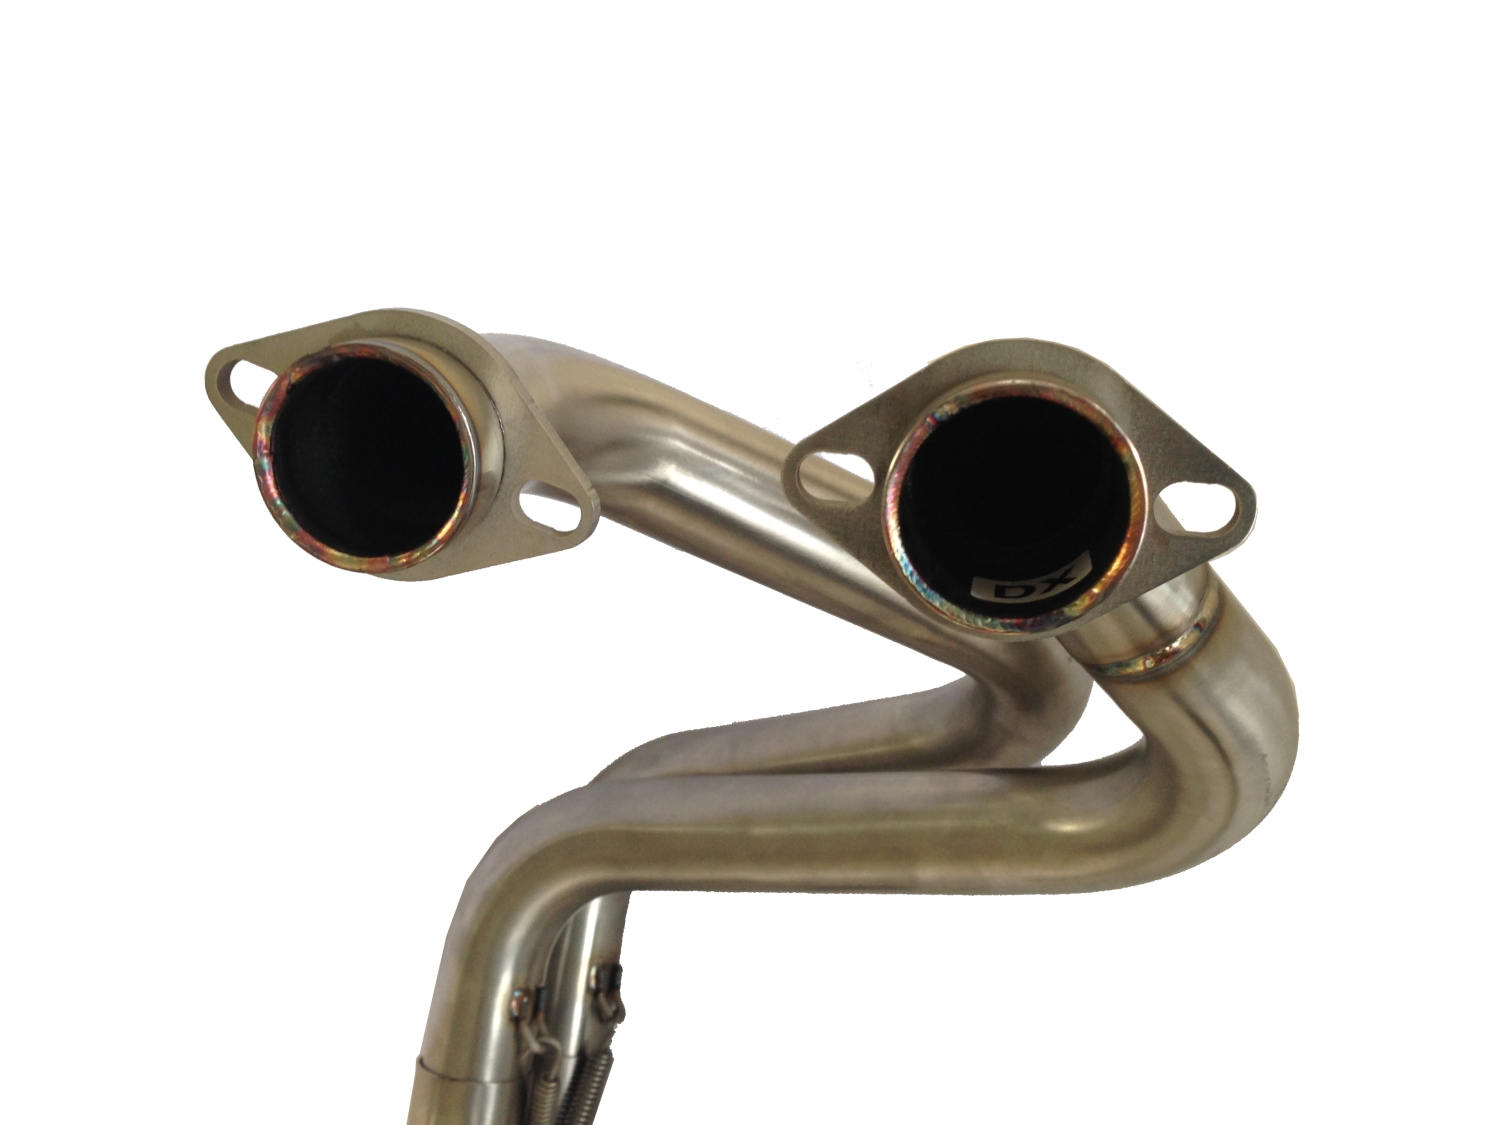 Exhaust system compatible with Kawasaki Er 6 N - F 2012-2016, Albus Ceramic, Homologated legal full system exhaust, including removable db killer 